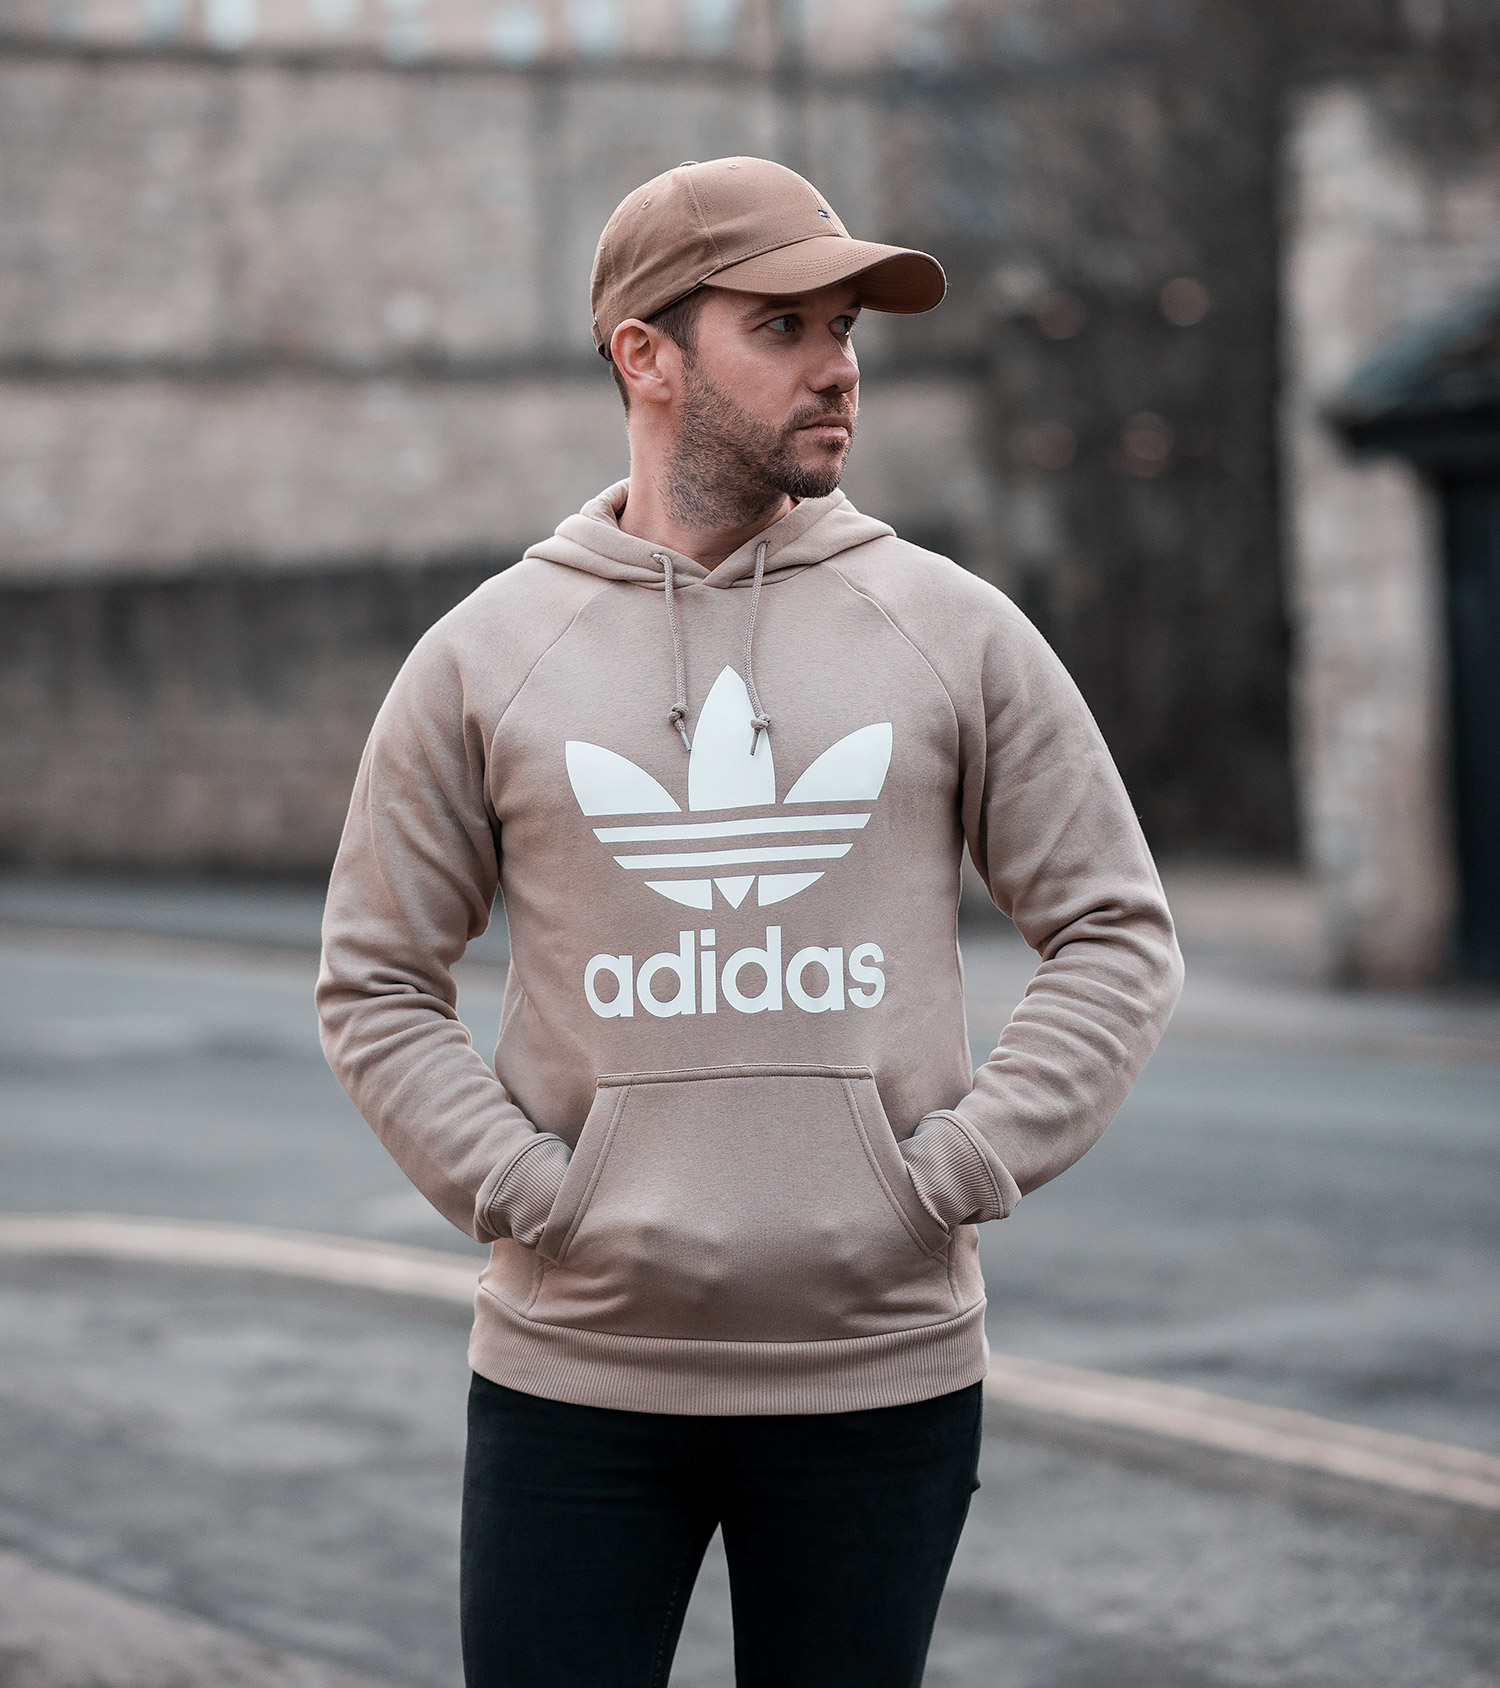 Adidas Trefoil Sweatshirt Style Outfit Your Guy